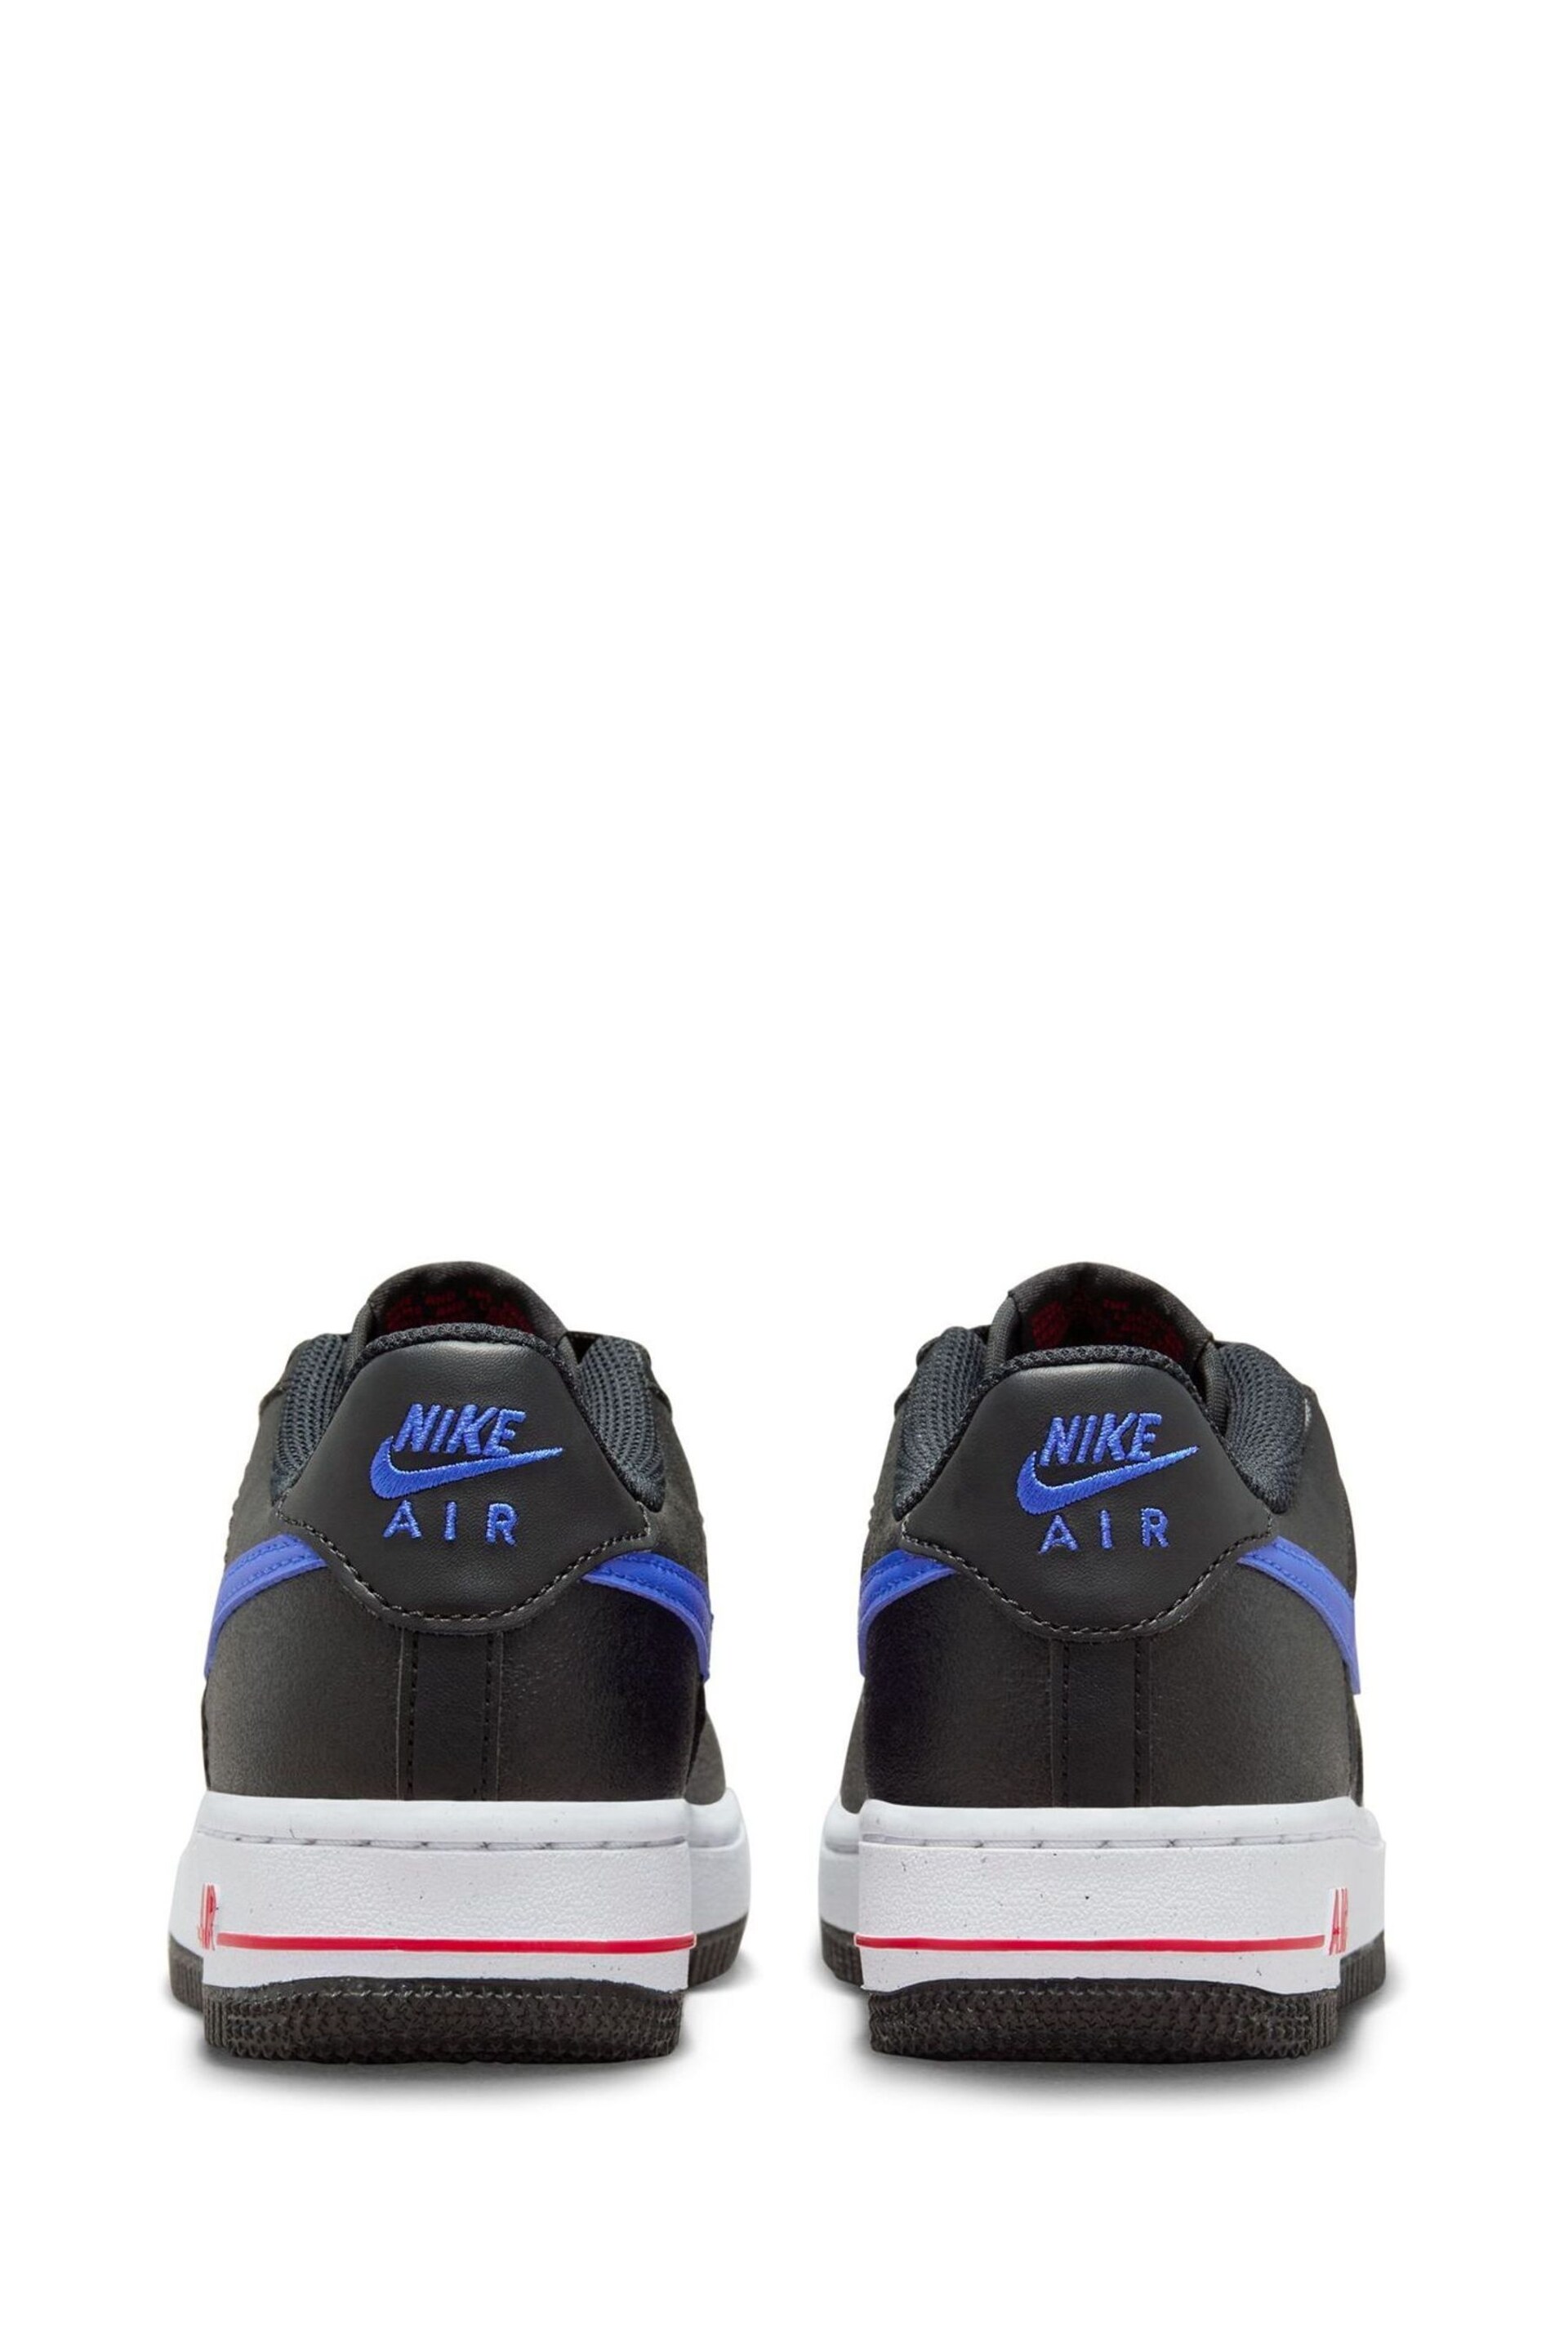 Nike Black/Grey Air Force 1 Next Nature Youth Trainers - Image 4 of 9